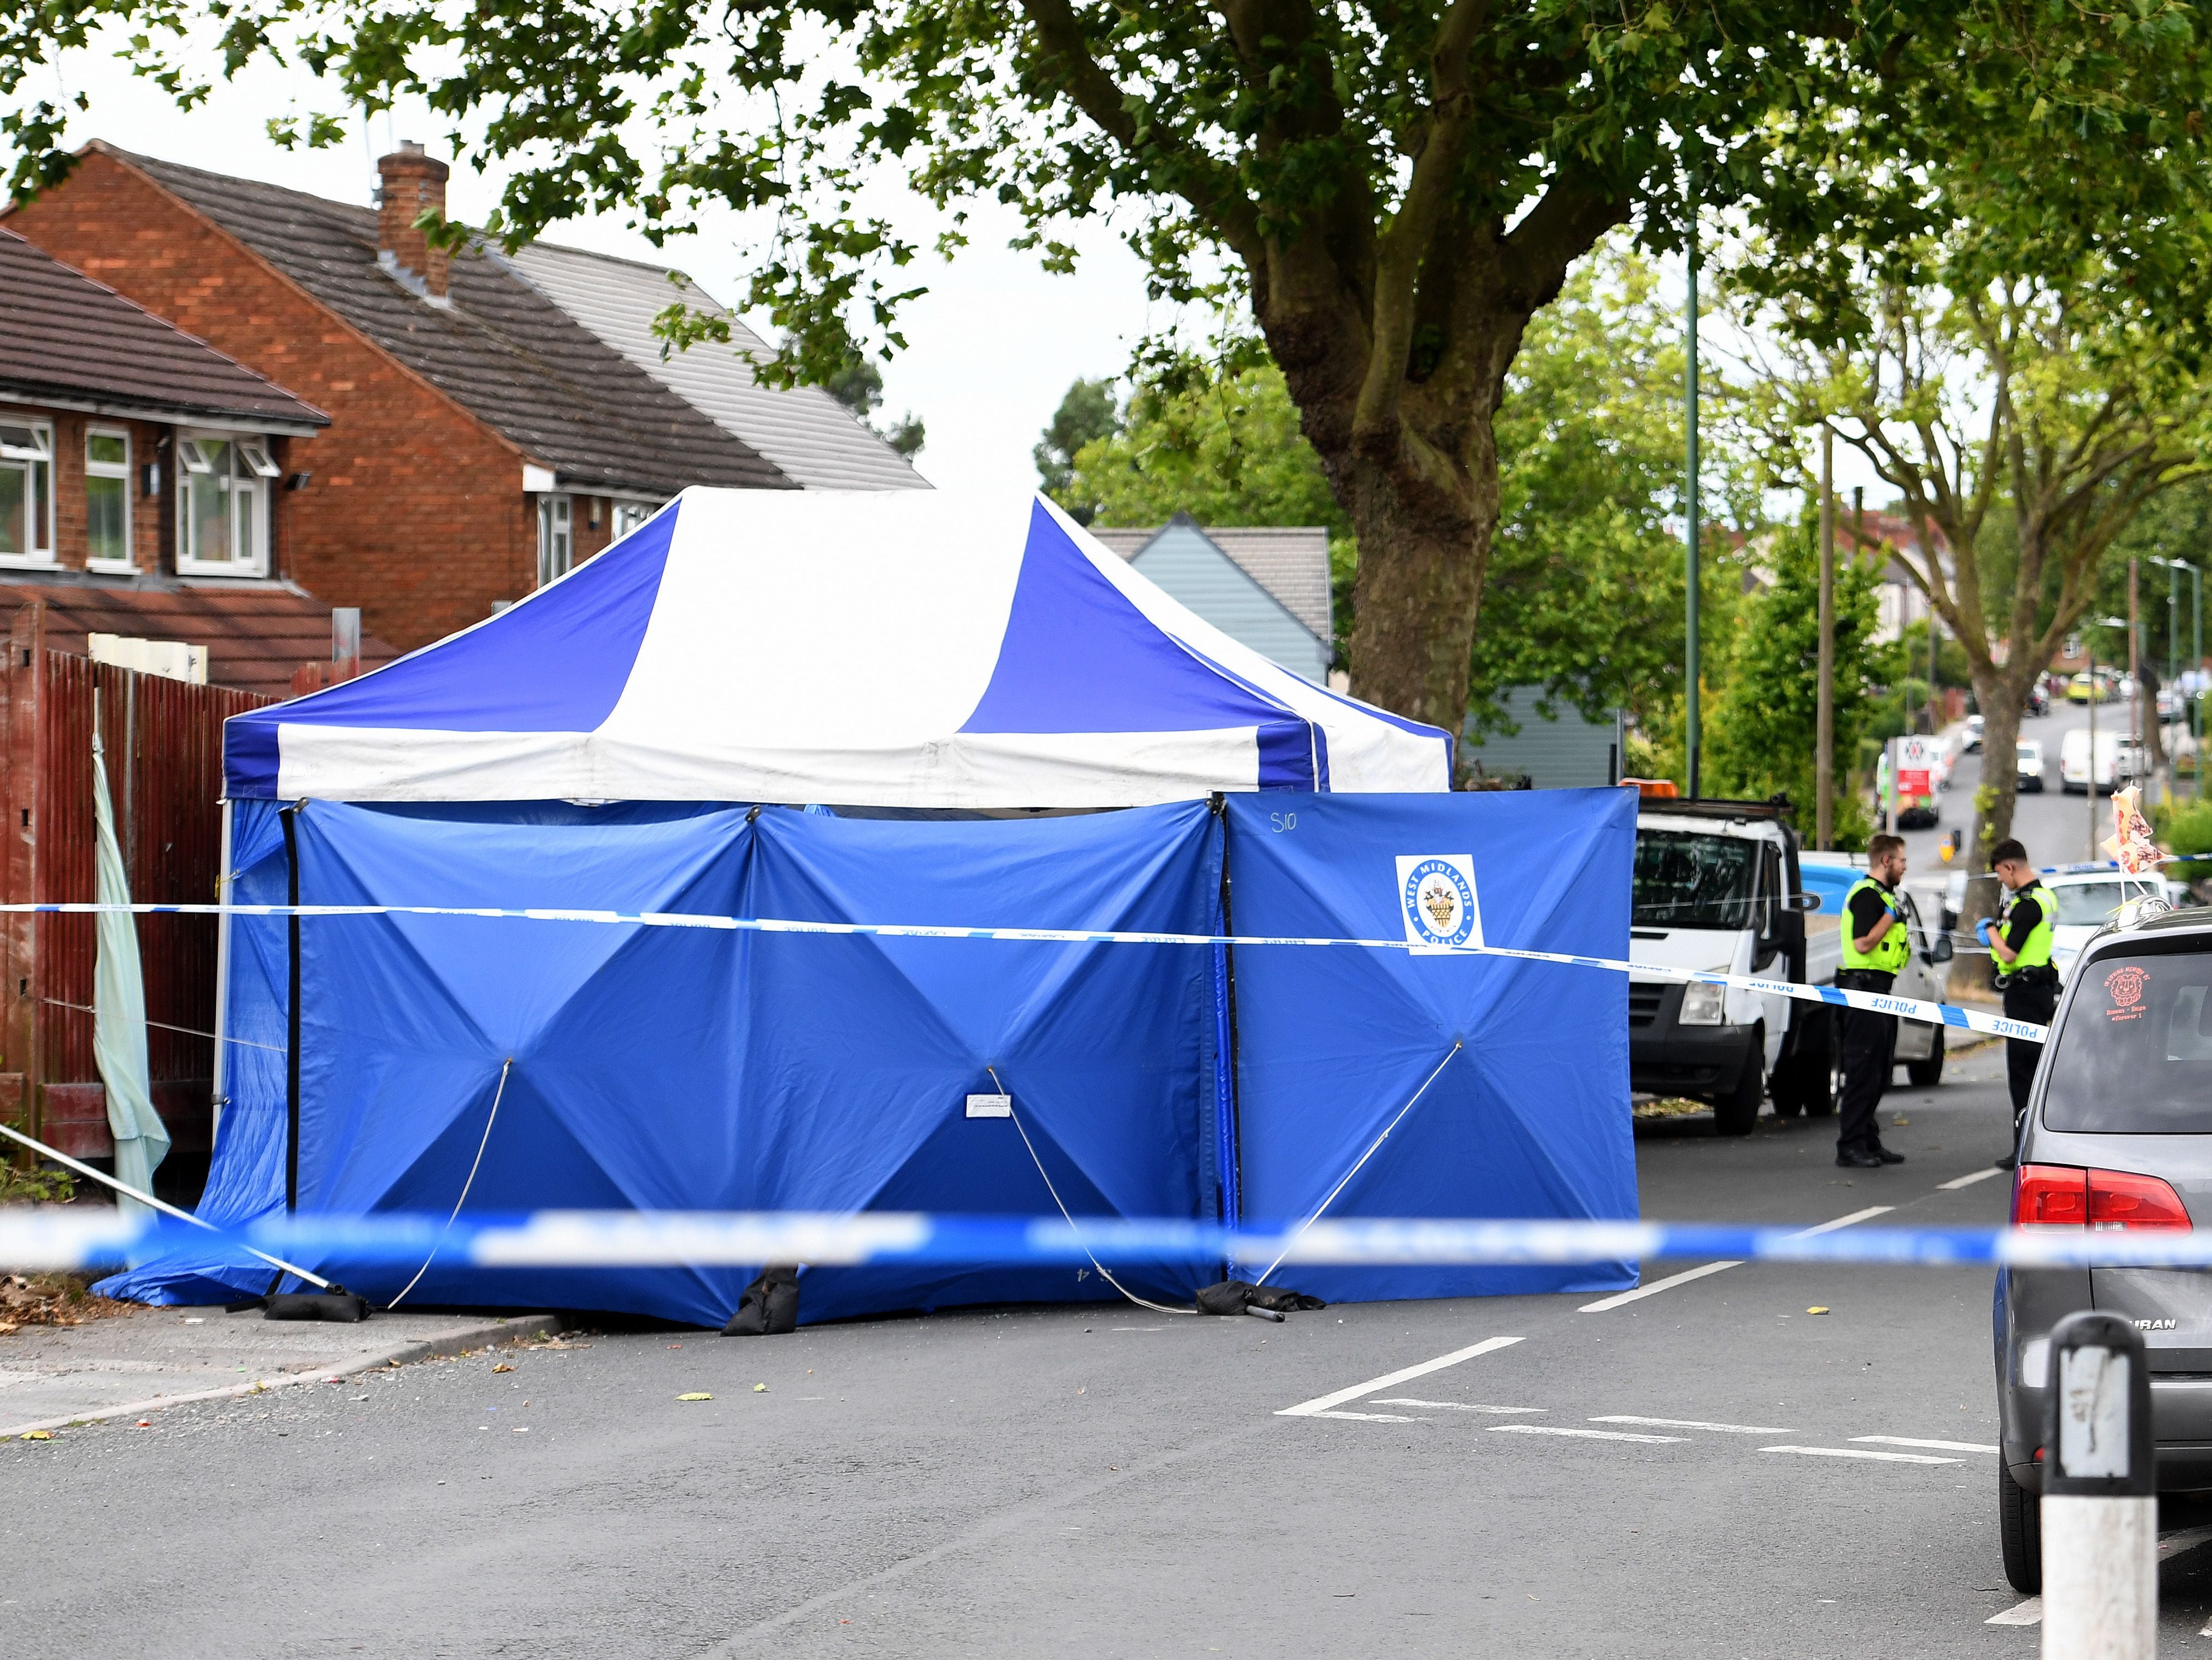 'Come together' call from Walsall Council leader after shootings in Bloxwich and Blakenall 